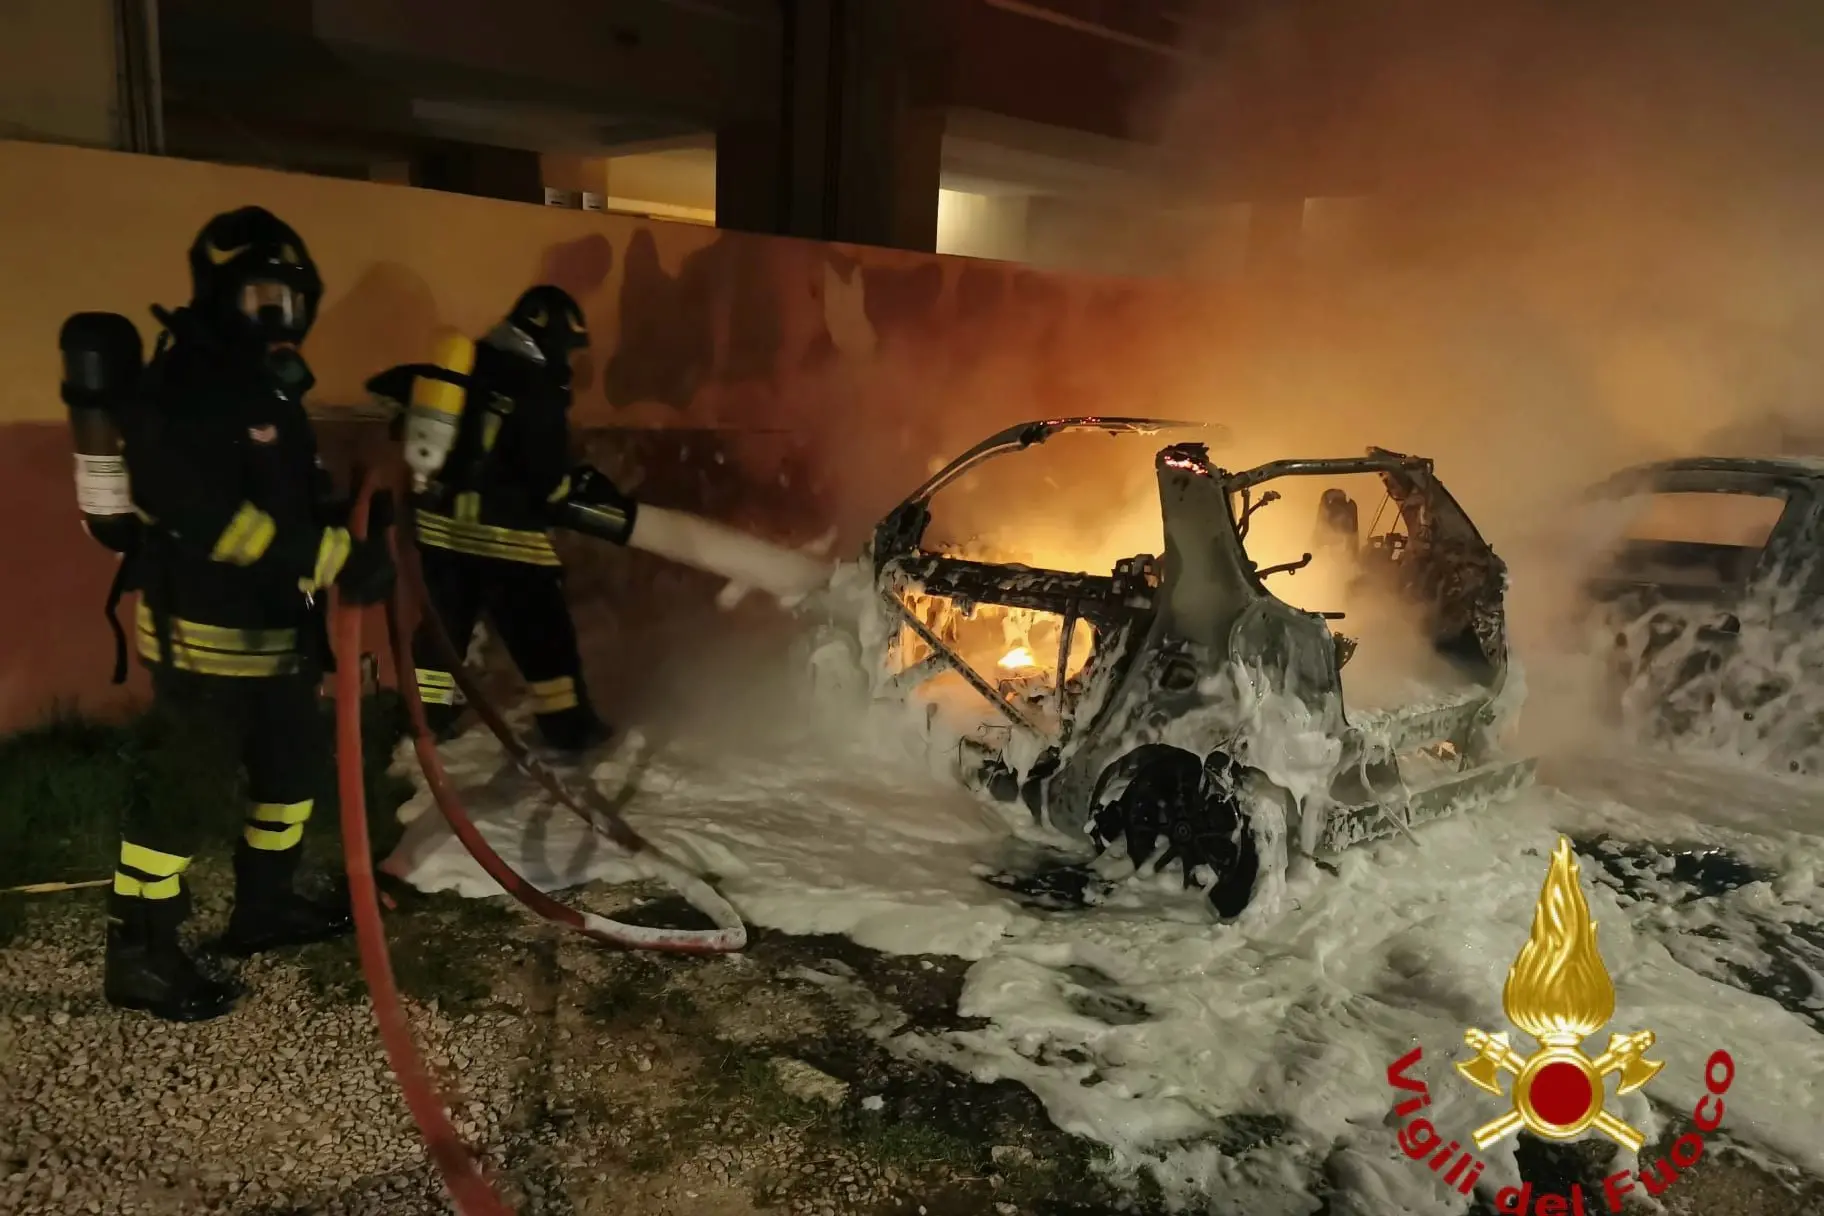 Firefighters in action to put out an arson fire in Olbia